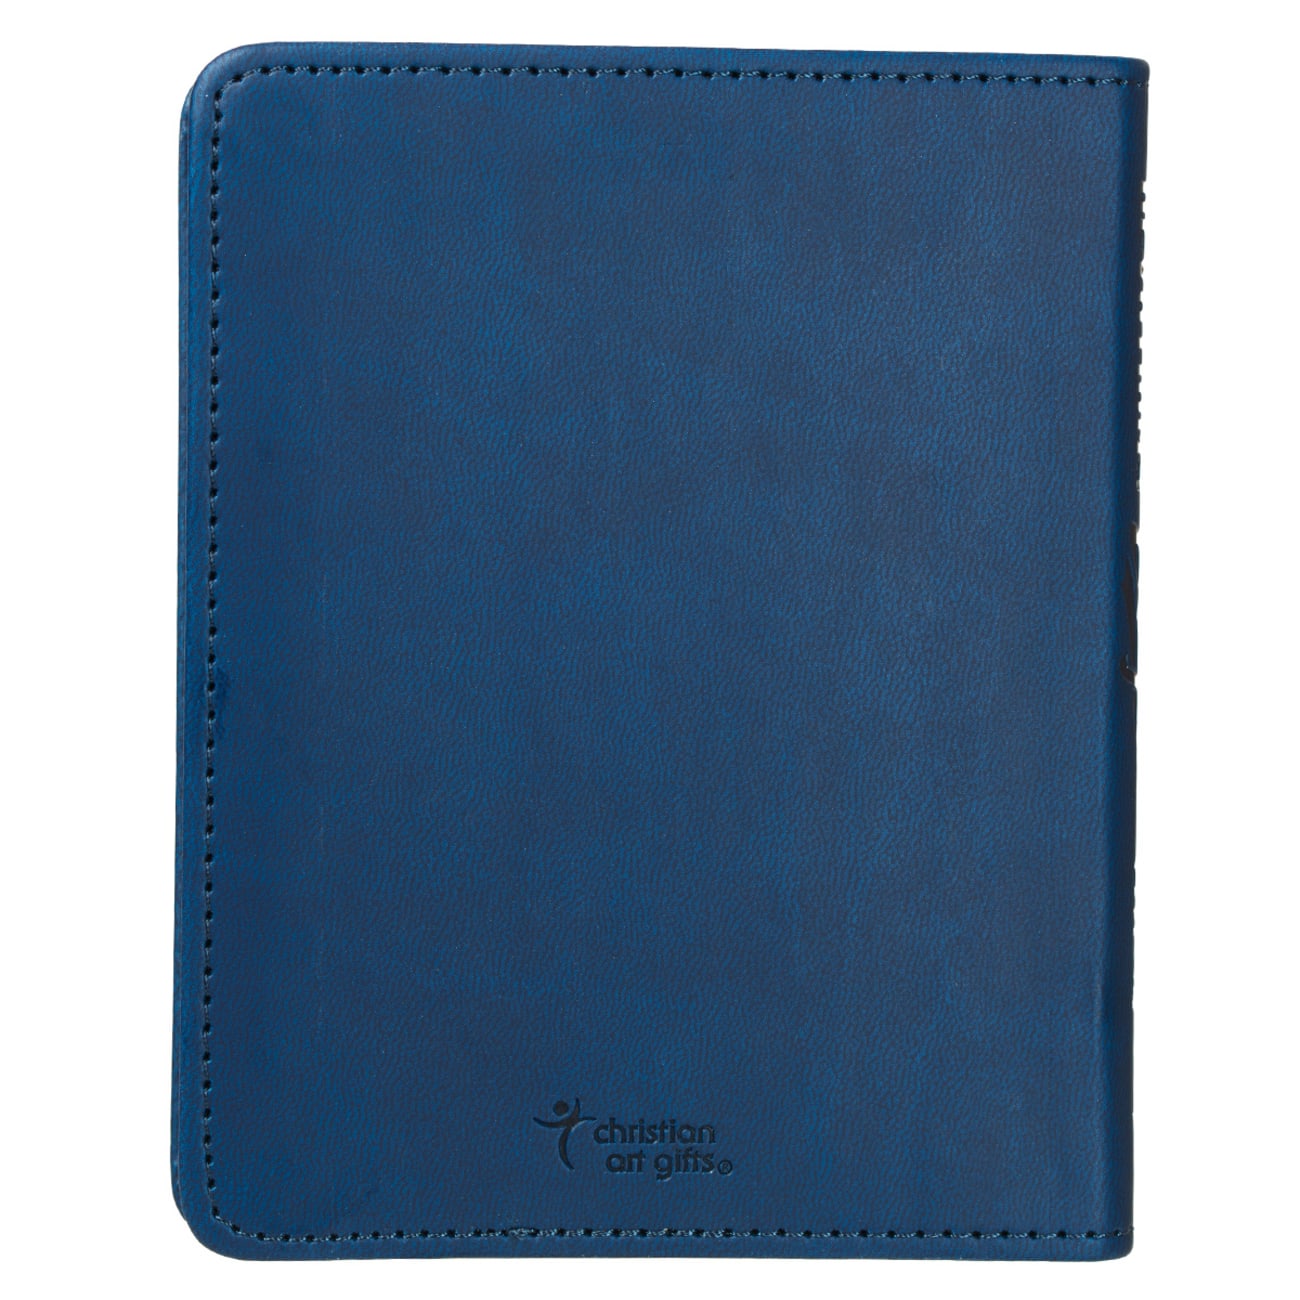 One-Minute Devotions For Boys (Navy) Imitation Leather